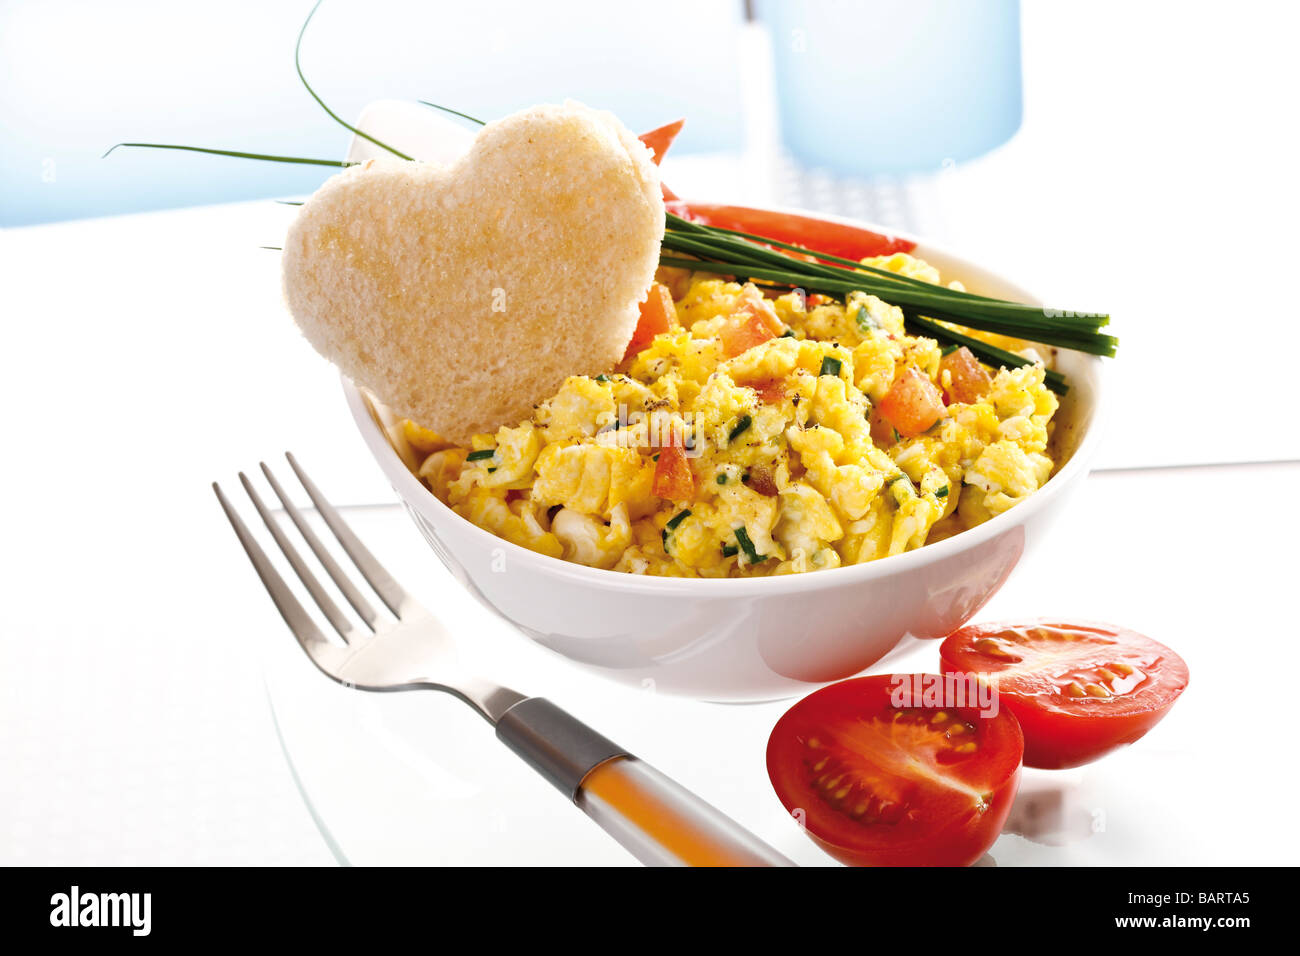 Scrambled eggs with tomatoes in bowl Stock Photo